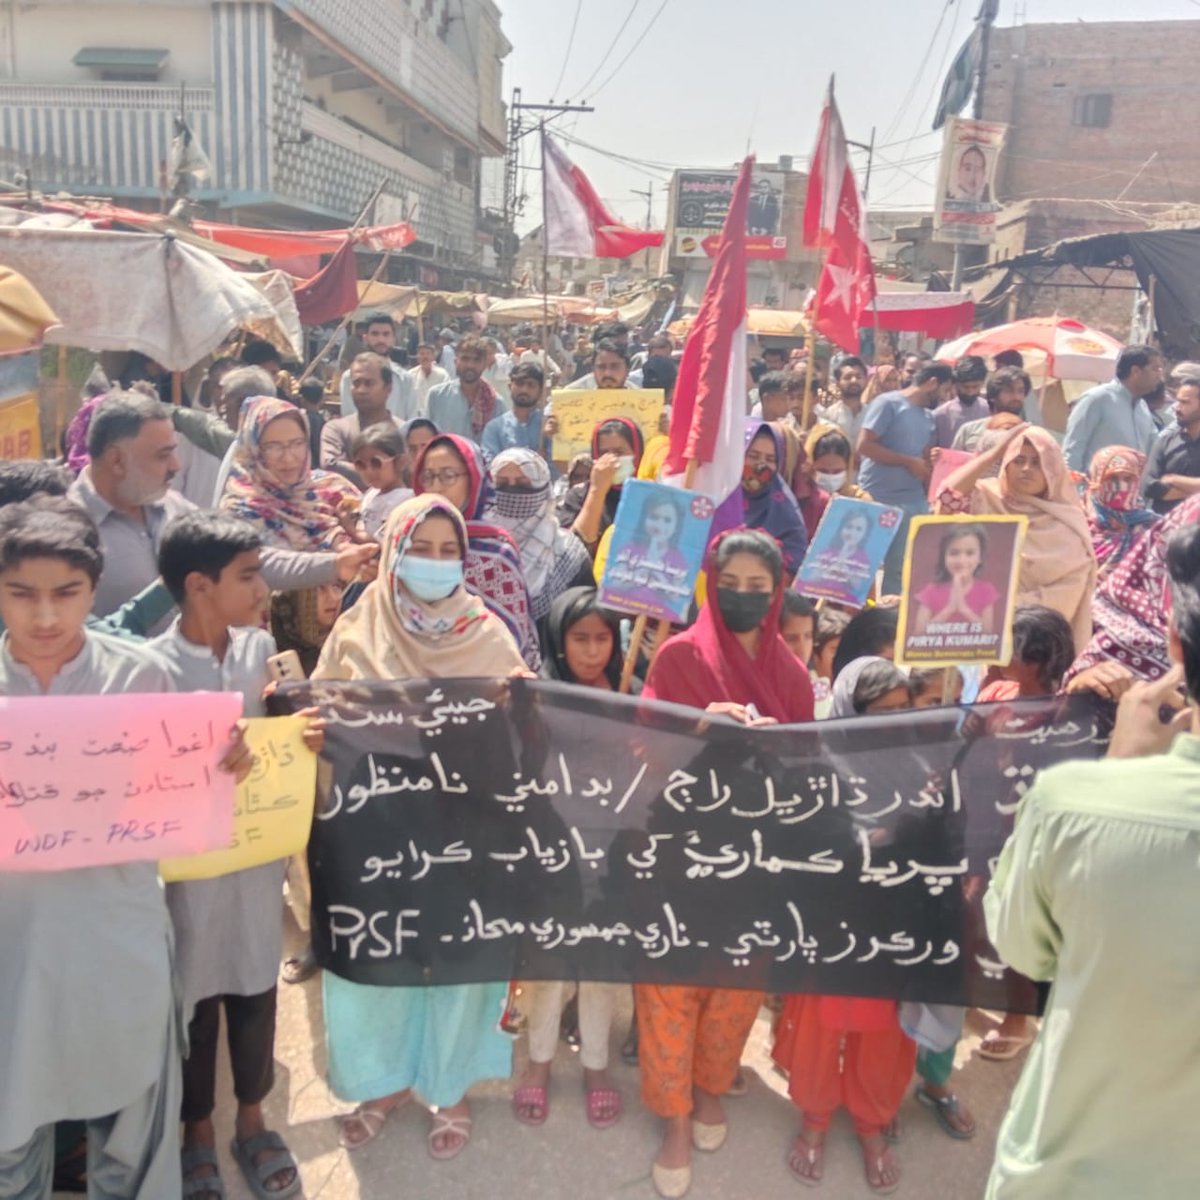 Sindh-wide protests by @AWPSindh today against the massive rise in kidnappings under state patronage & to demand the safe recovery of missing child Priya Kumari. Those in the state responsible for protecting the abductors must be held to account. #BringBackPriyaKumari